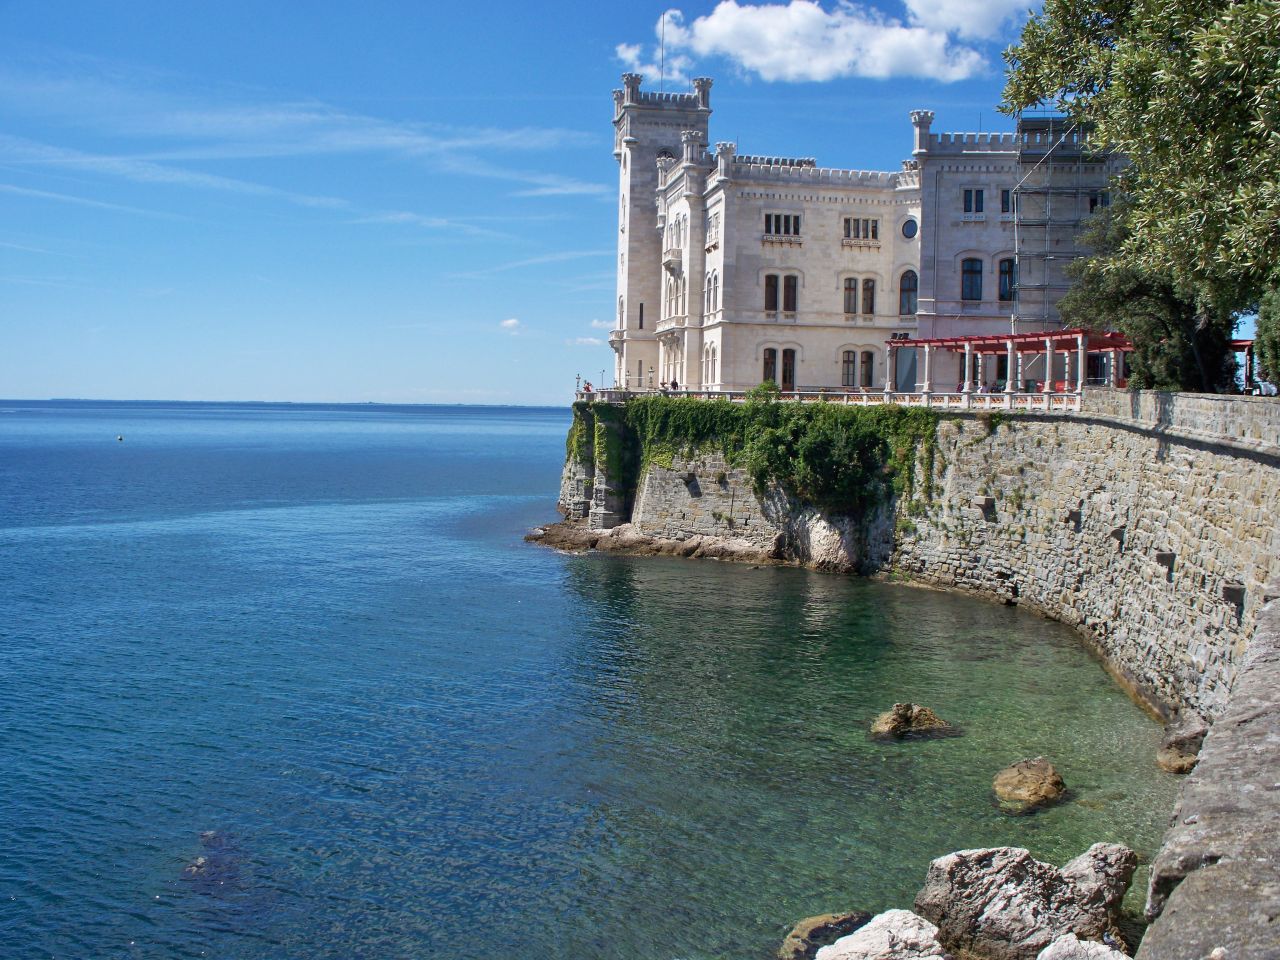 Trieste, two hours east, is emerging as a rival port to Venice.